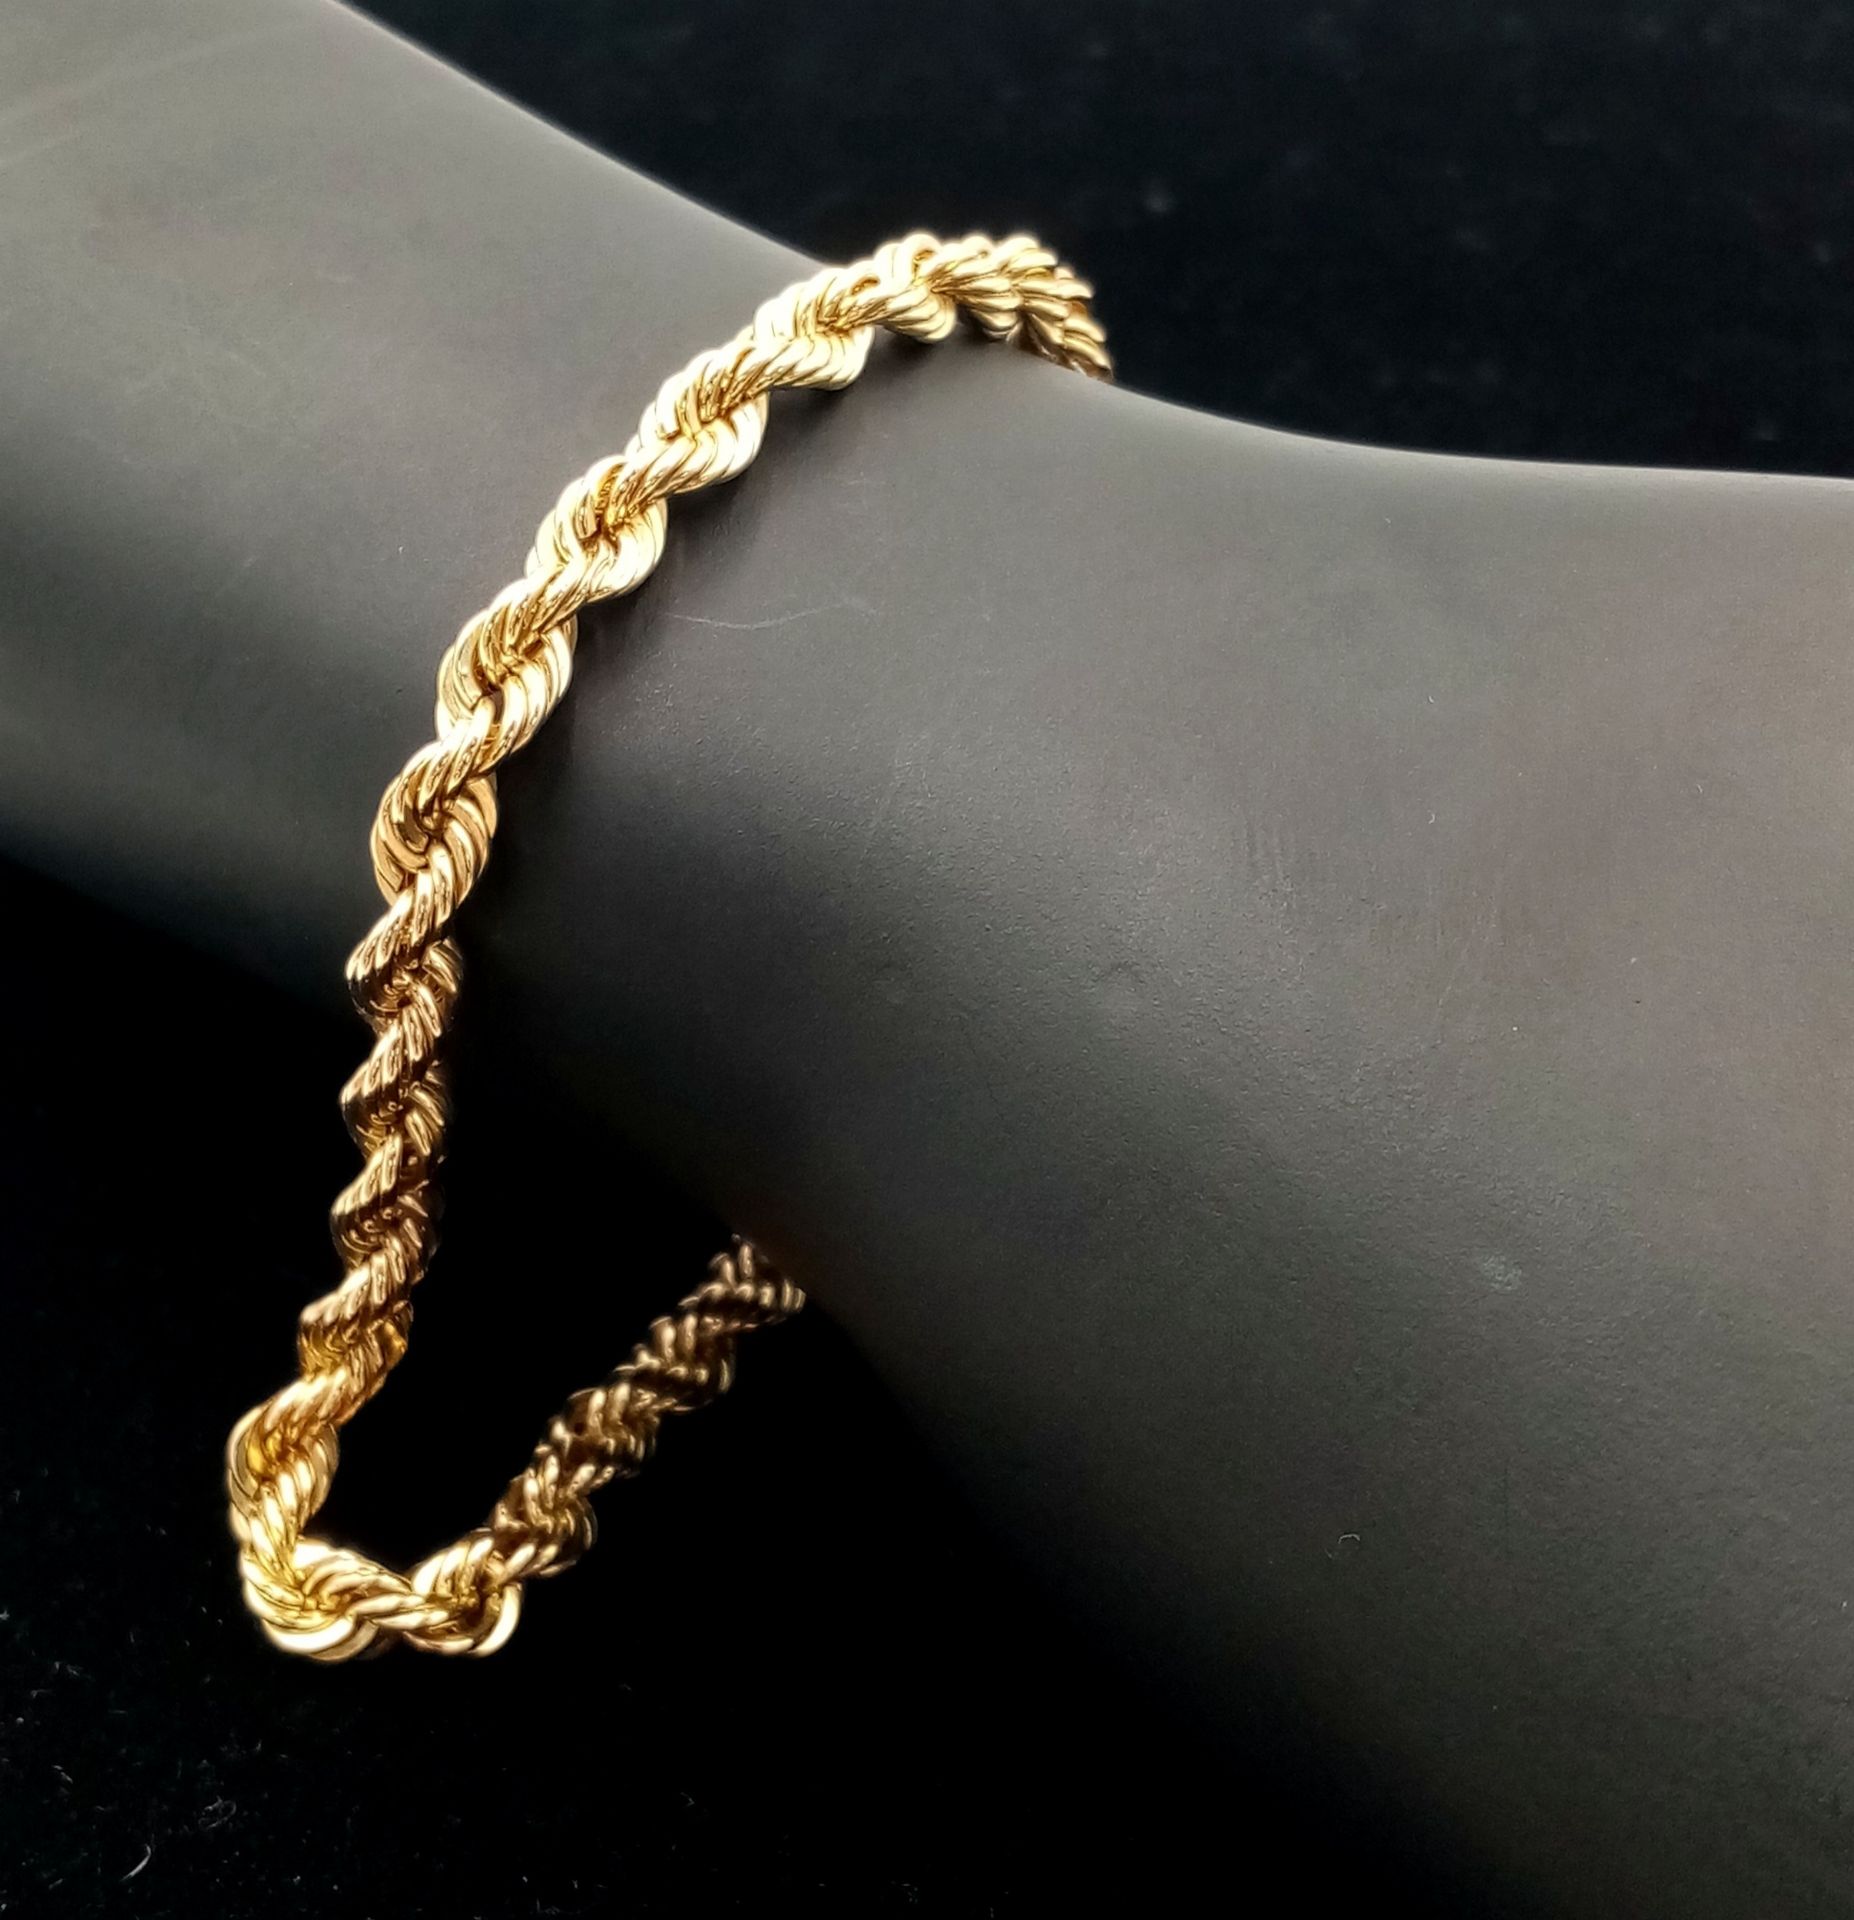 A 9K YELLOW GOLD ROPE BRACELET. 20cm length, 3.1g weight. Ref: SC 8004 - Image 2 of 4